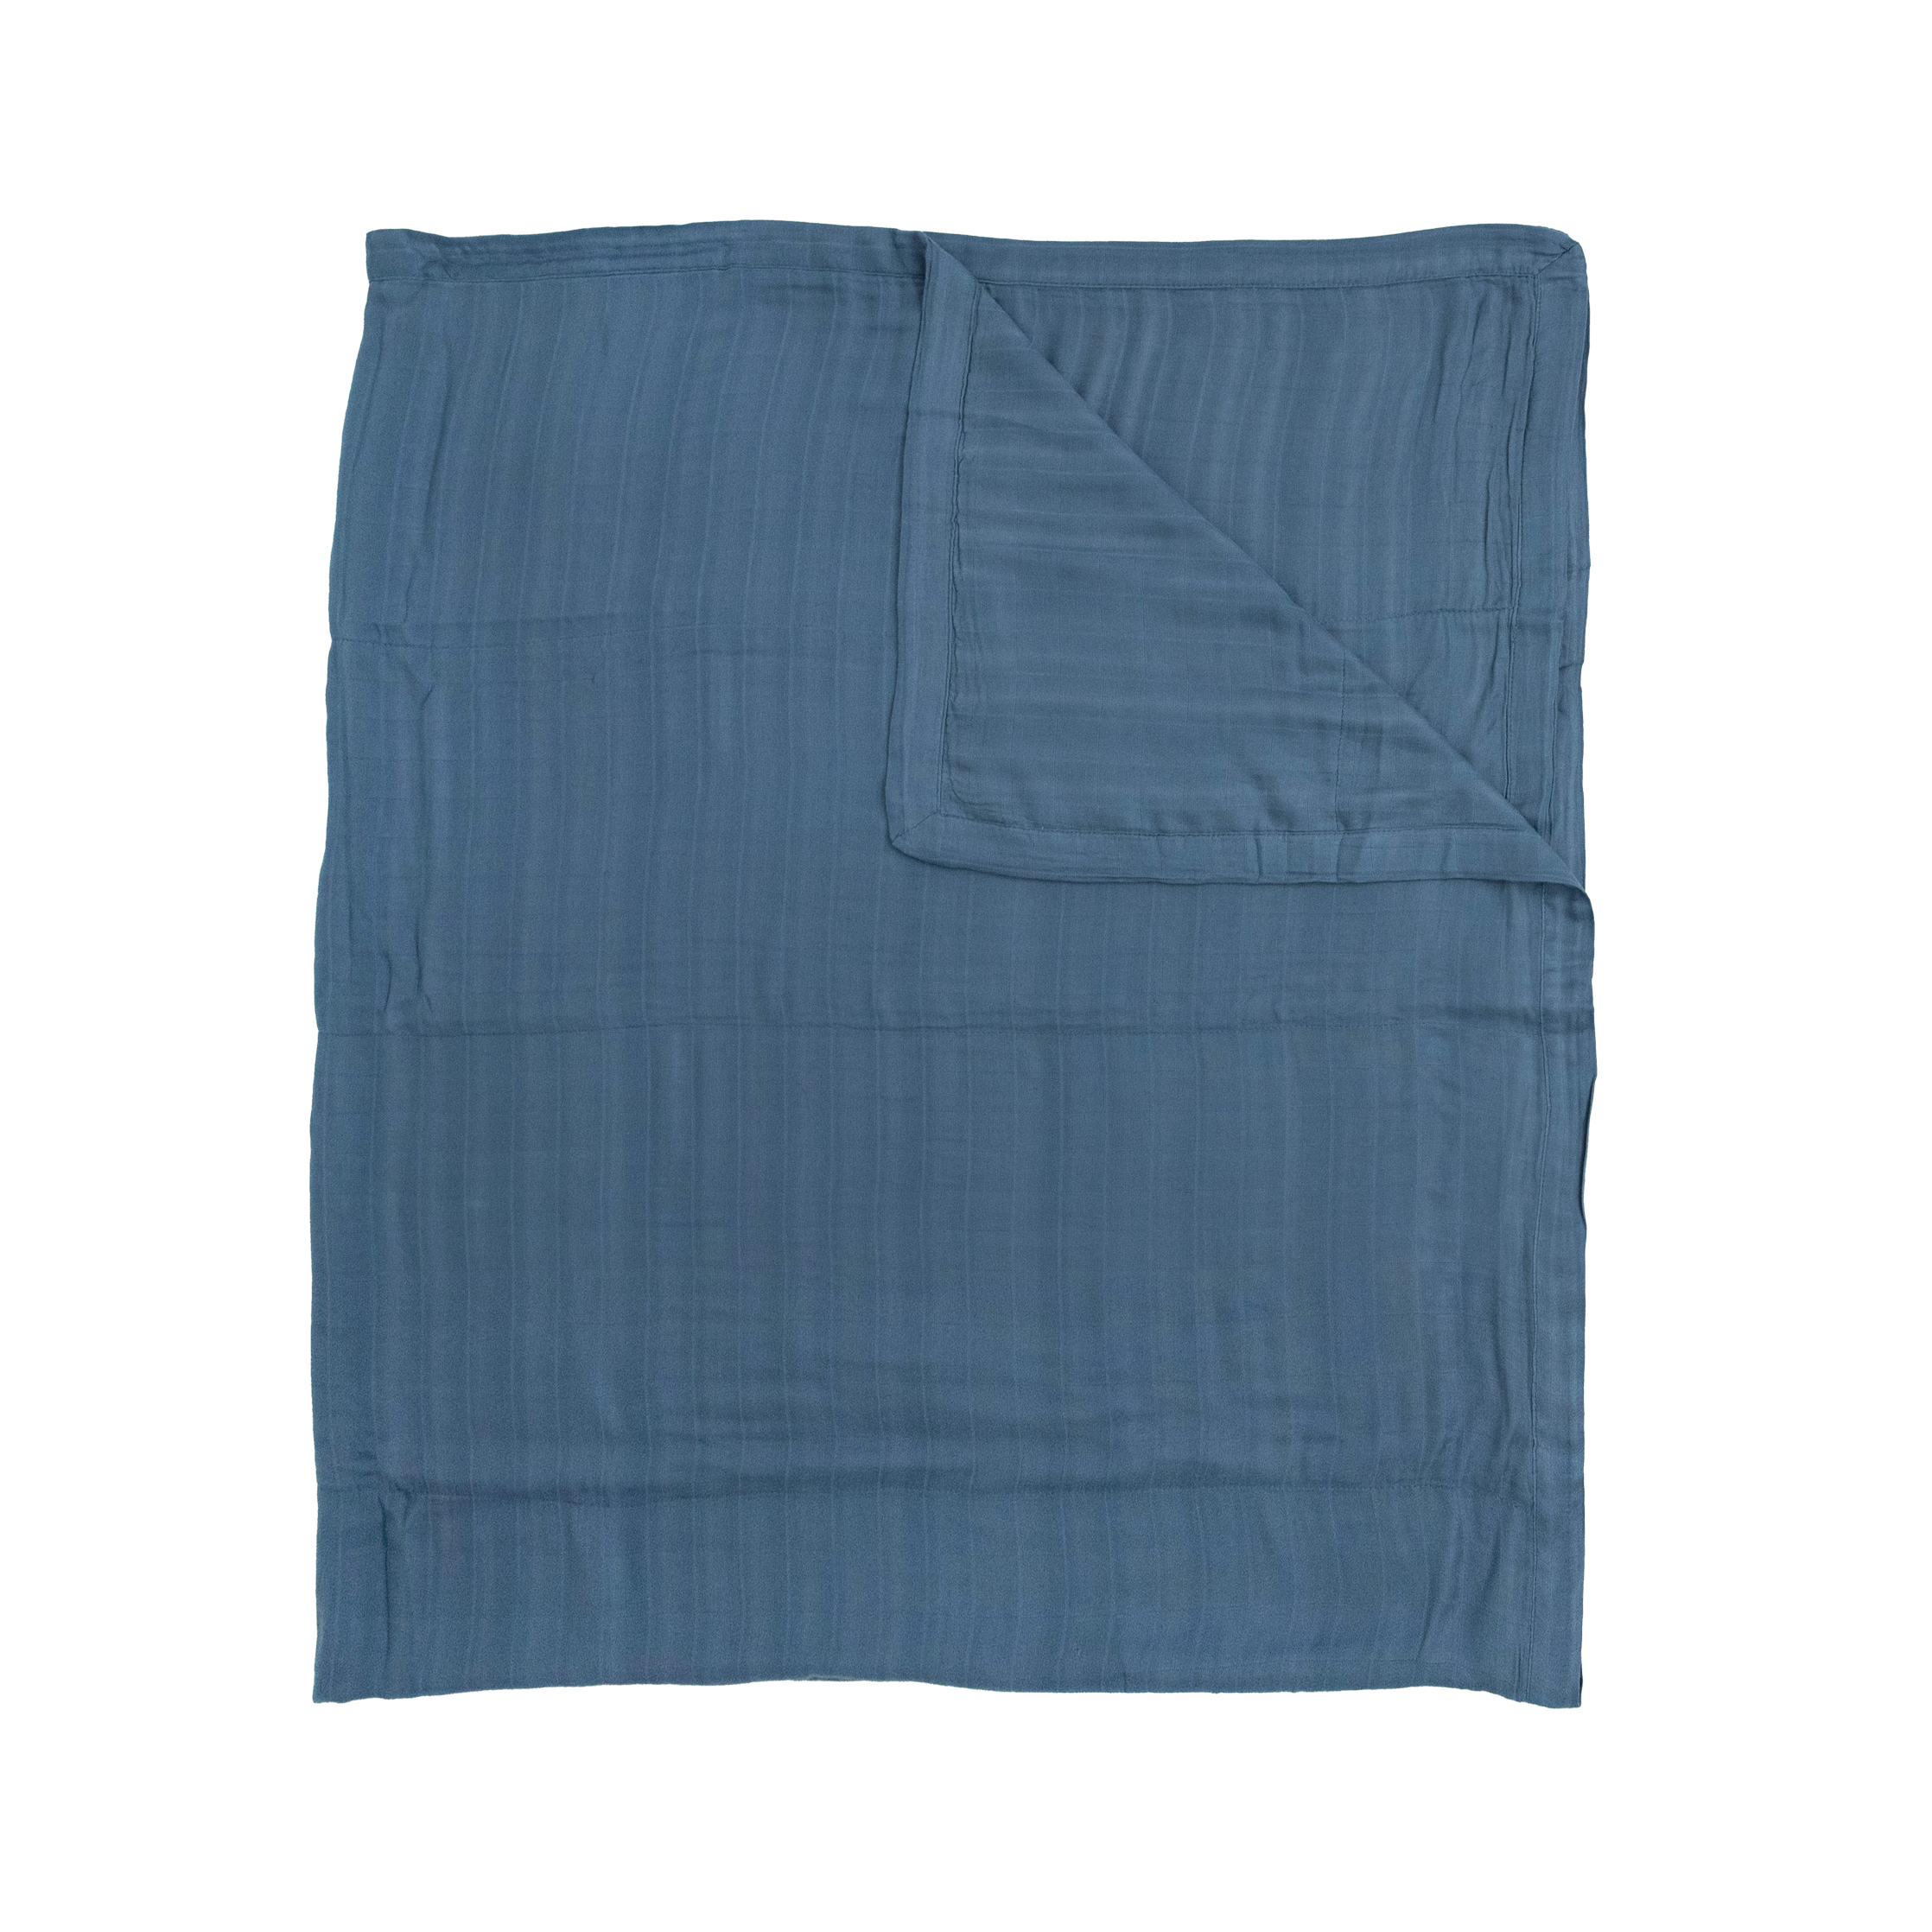 Deluxe Muslin Quilted Throw - Blue Dusk